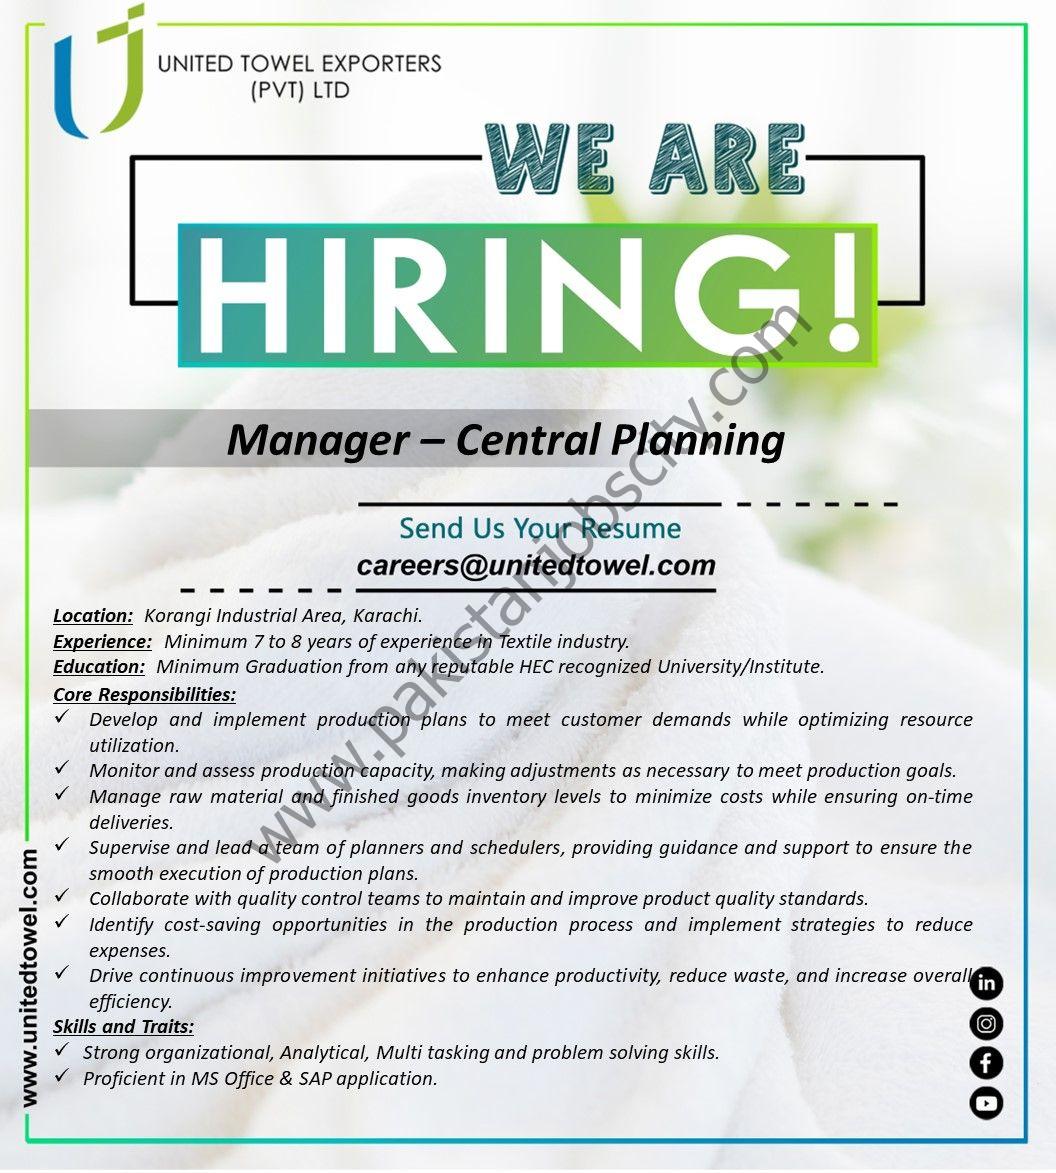 United Towel Exporters Pvt Ltd Jobs Manager Central Planning 1